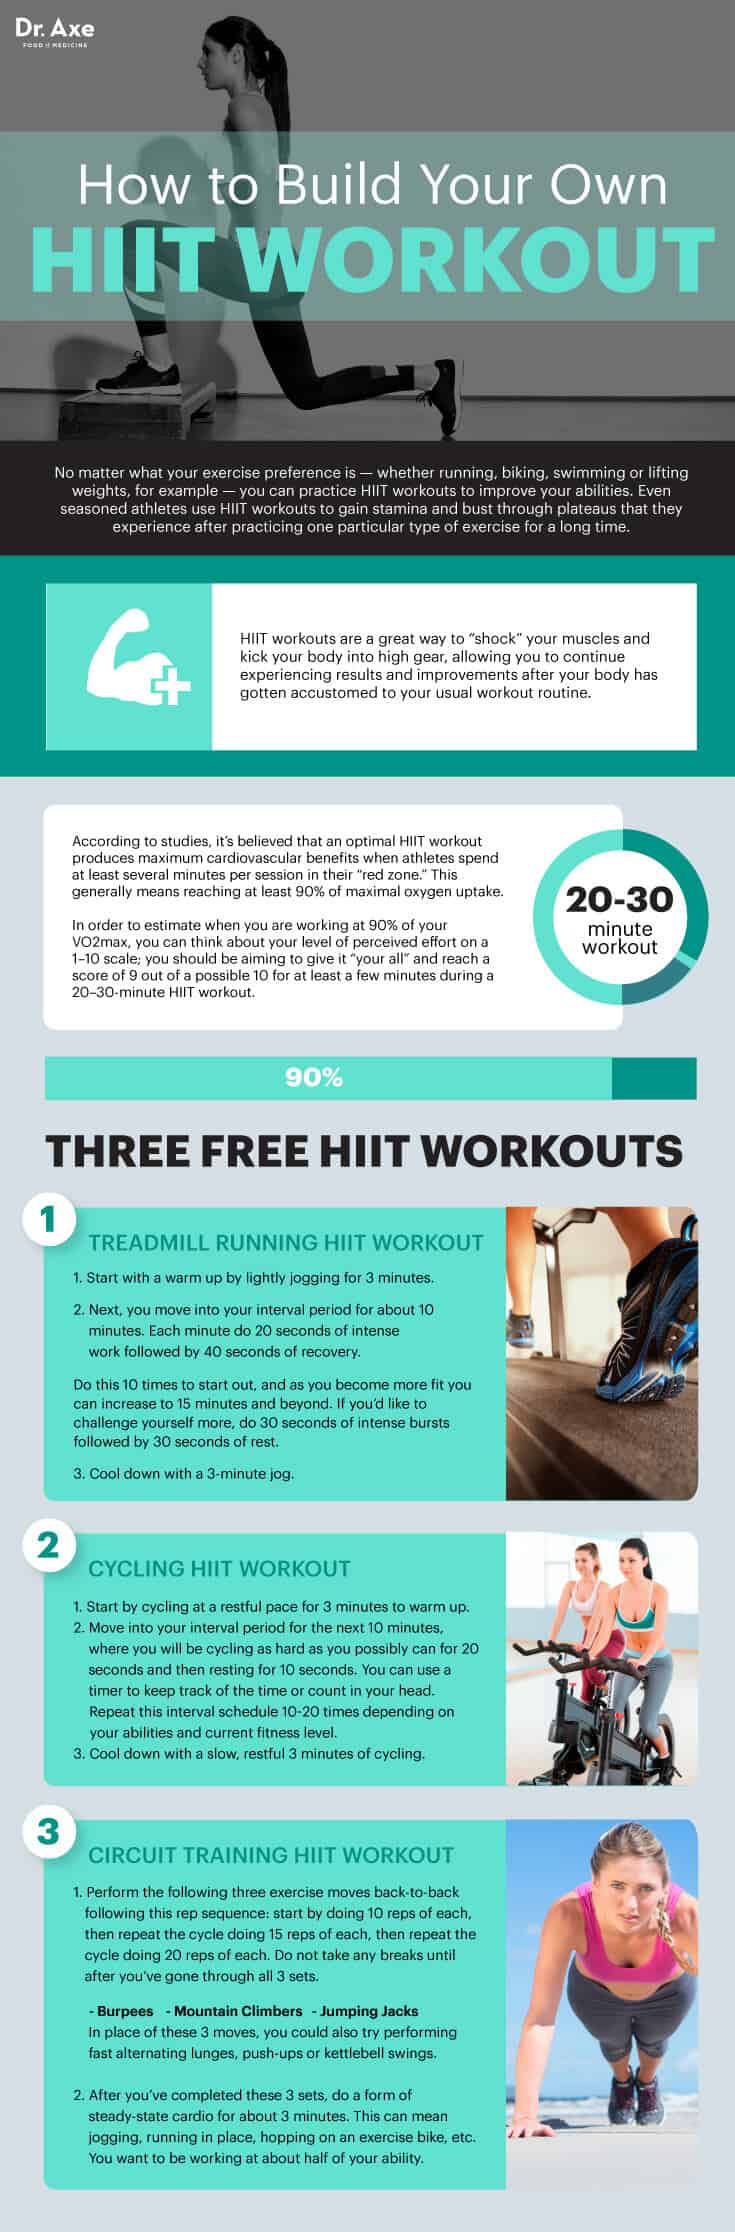 How to do a HIIT workout